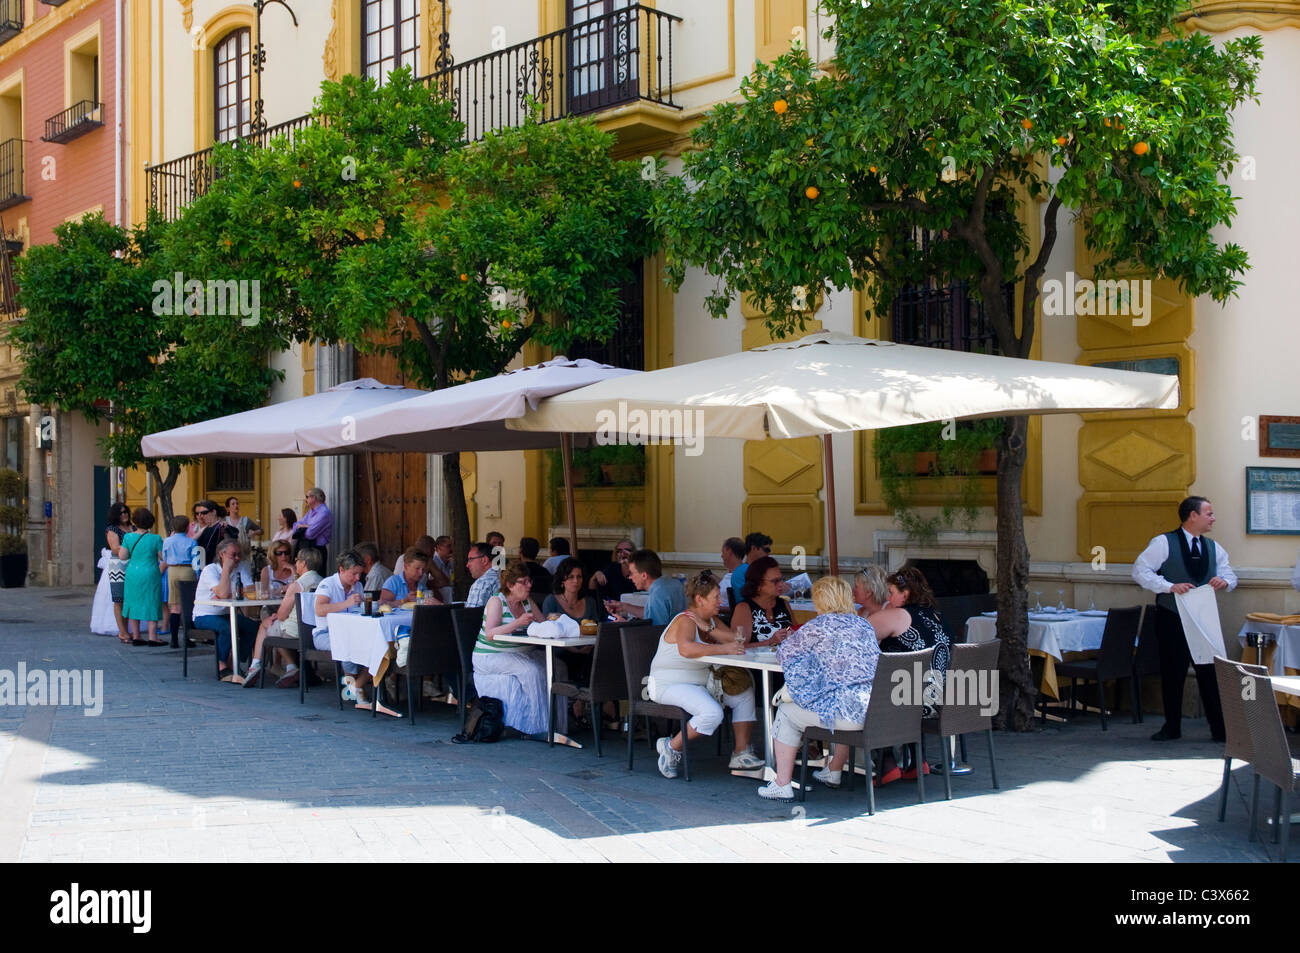 Street scene, Seville, Spain. People enjoying eating and drinking at an outdoor cafe bar with parasols. Stock Photo